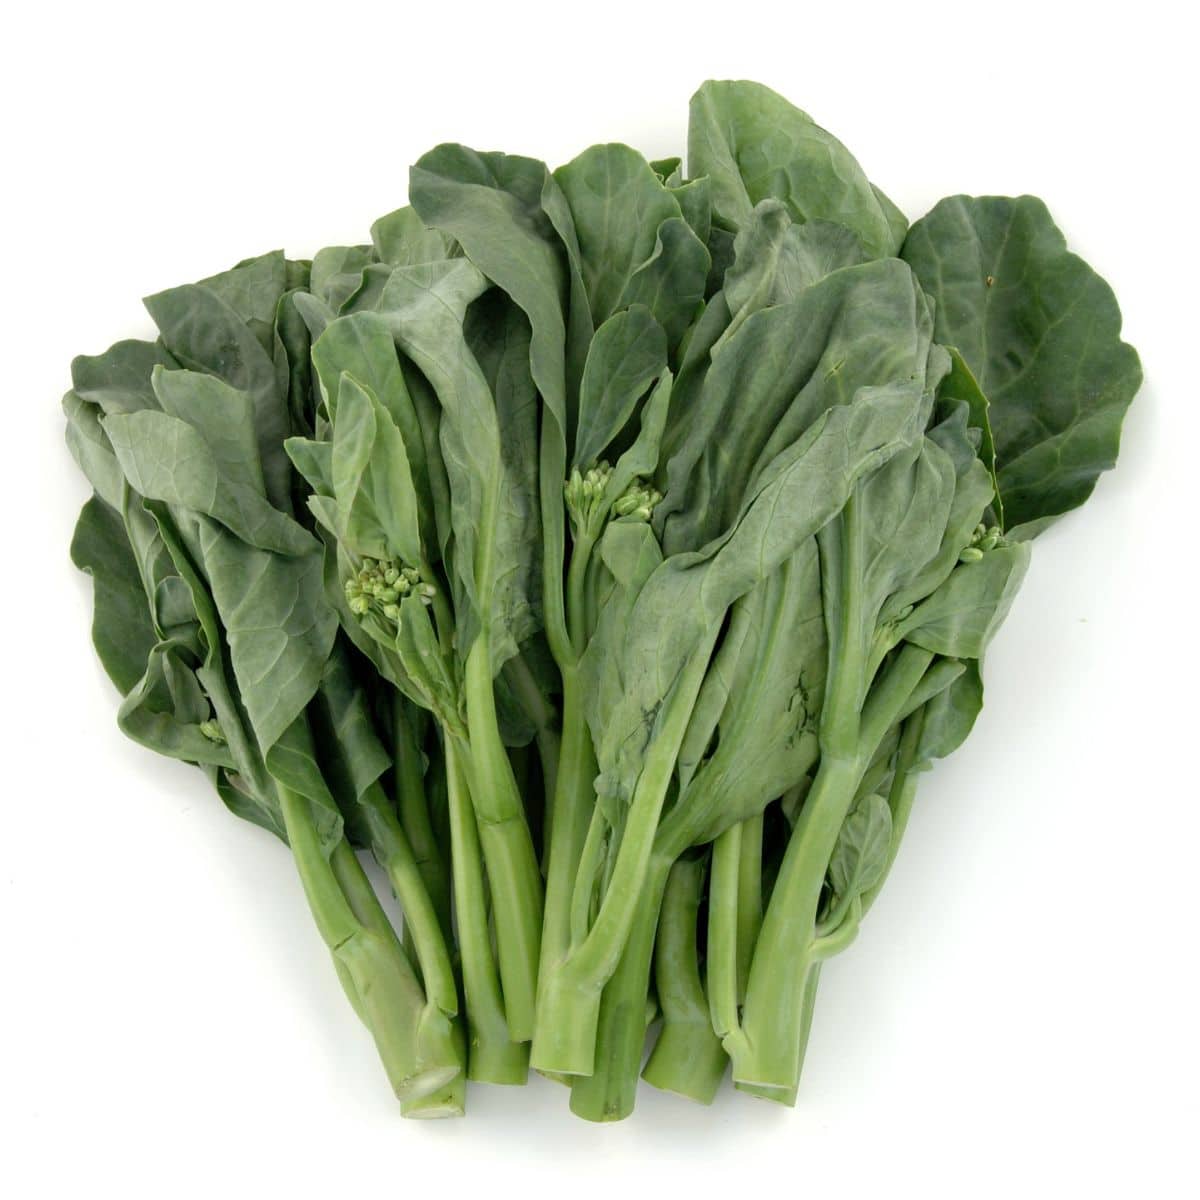 Chinese broccoli on a white background.